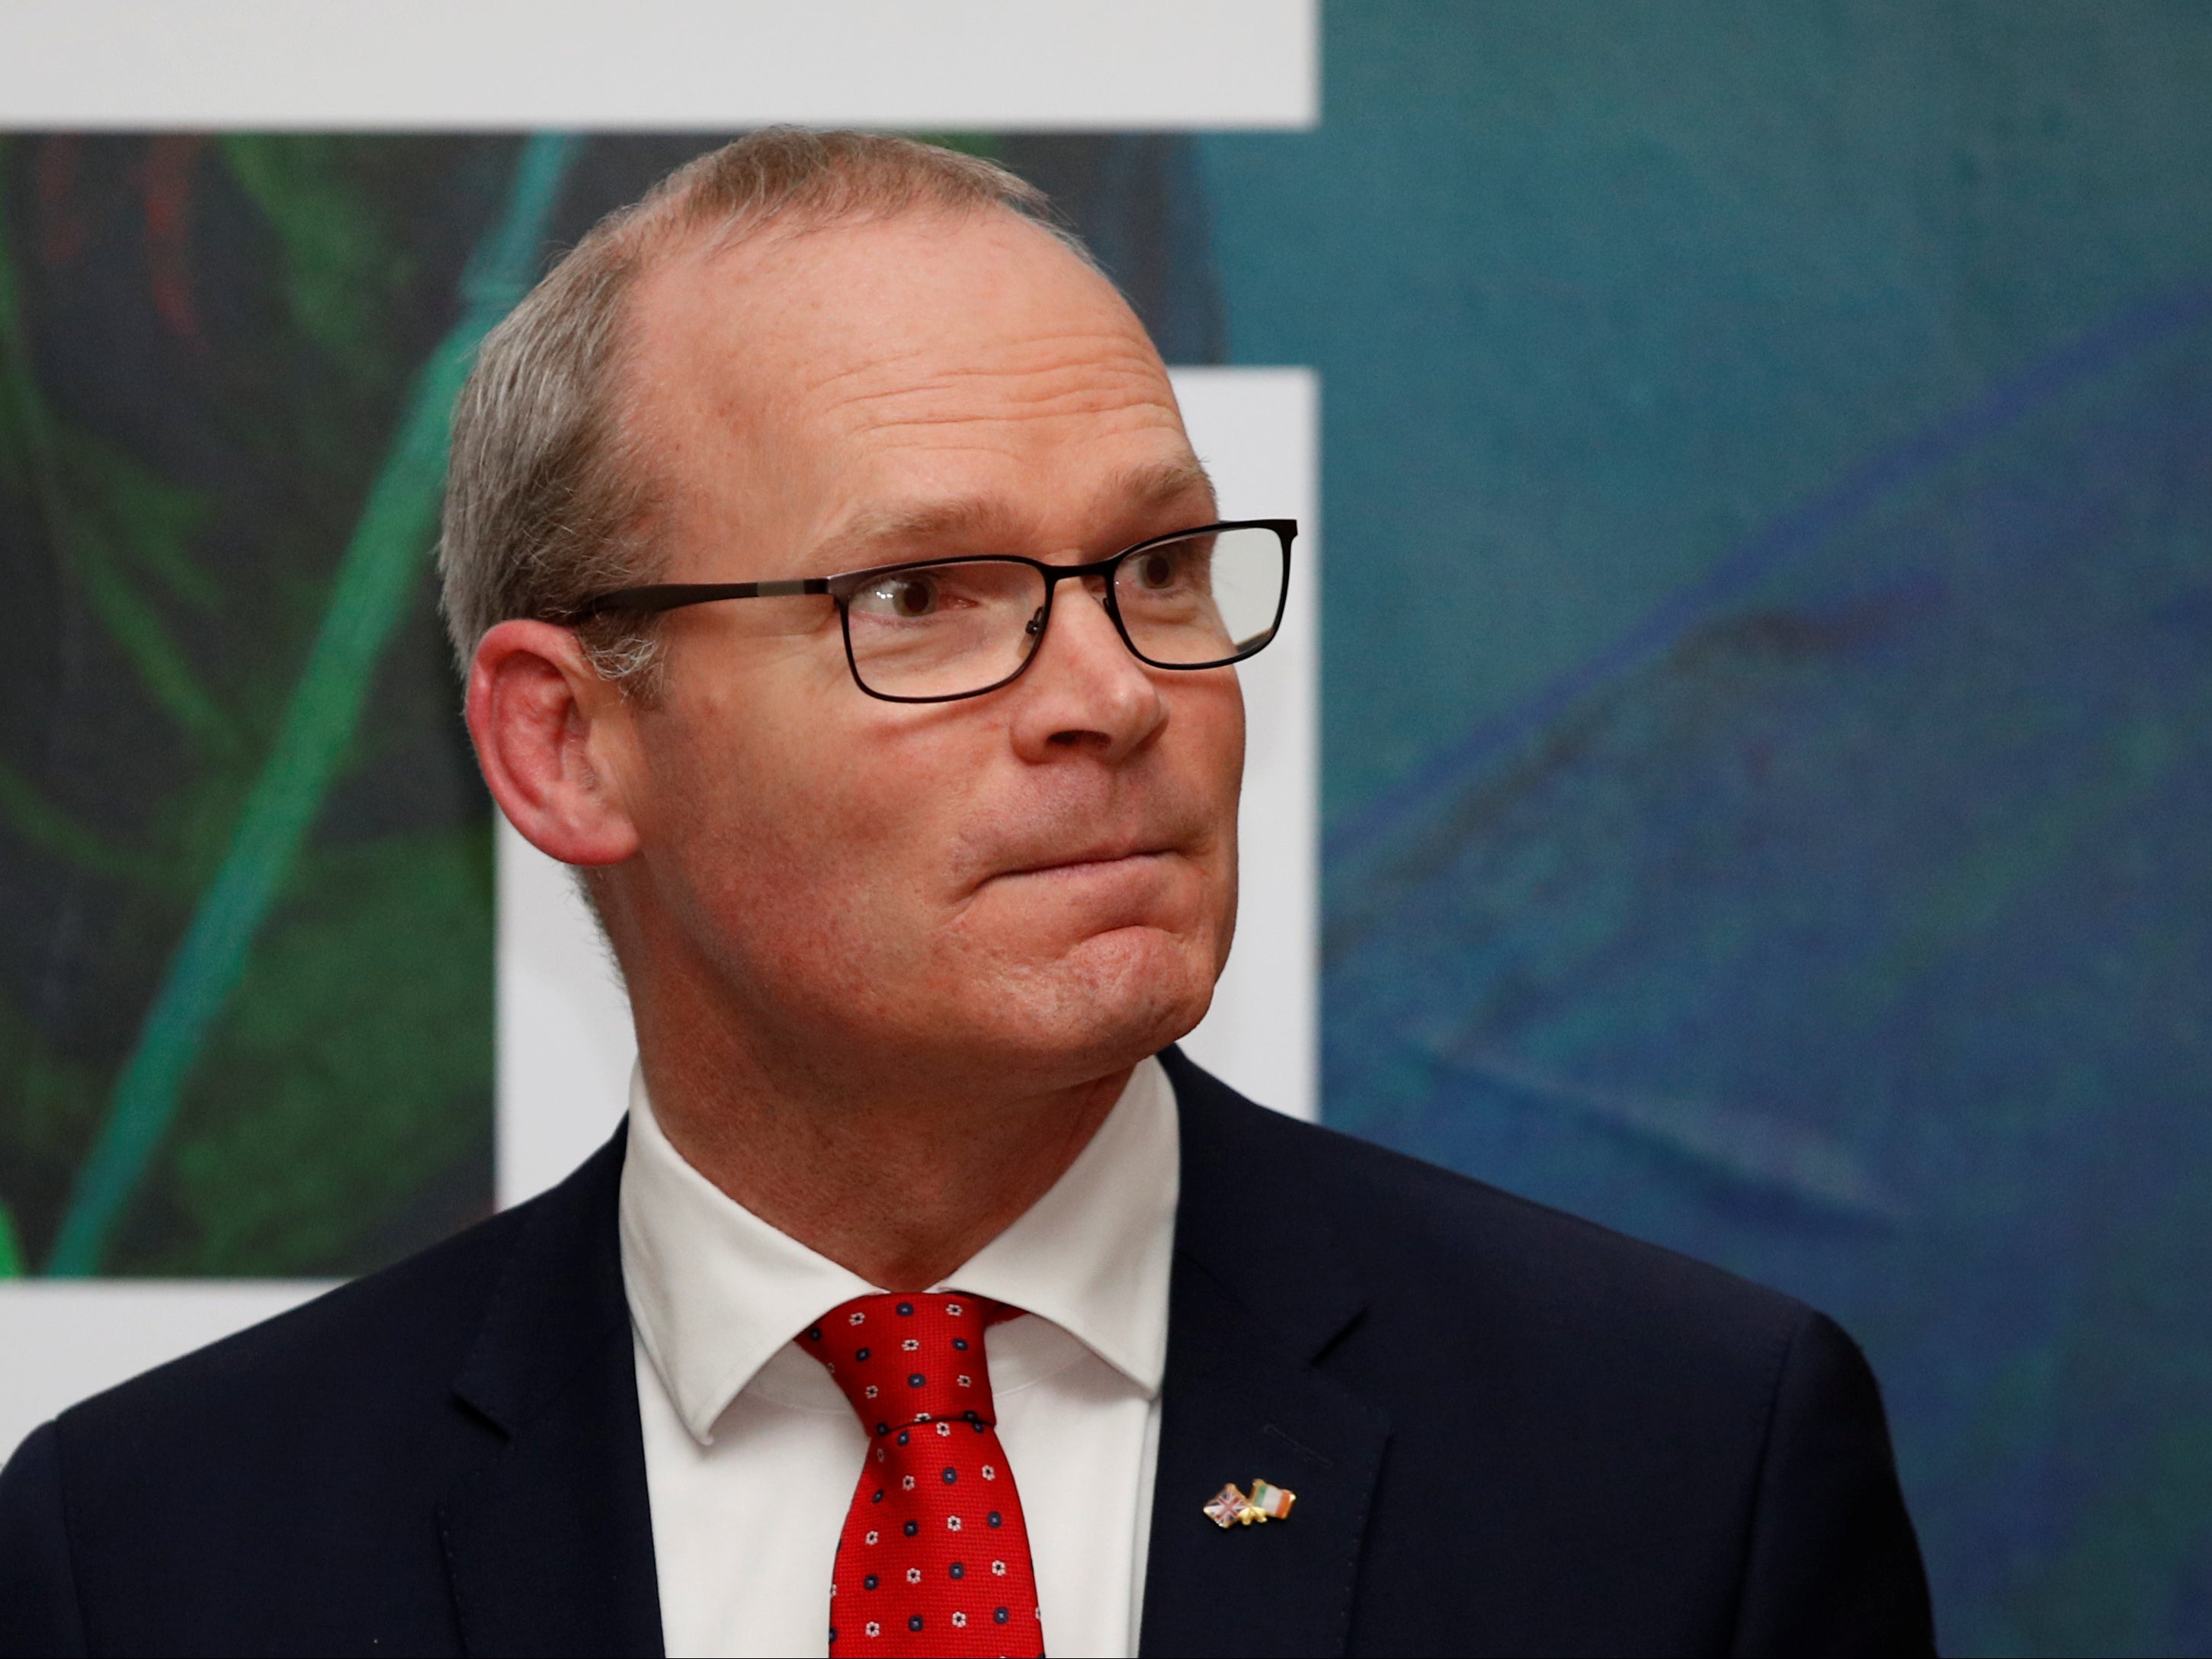 Irish foreign minister Simon Coveney has ordered an inquiry into a champagne party attended by his officials during the country’s first national Covid lockdown